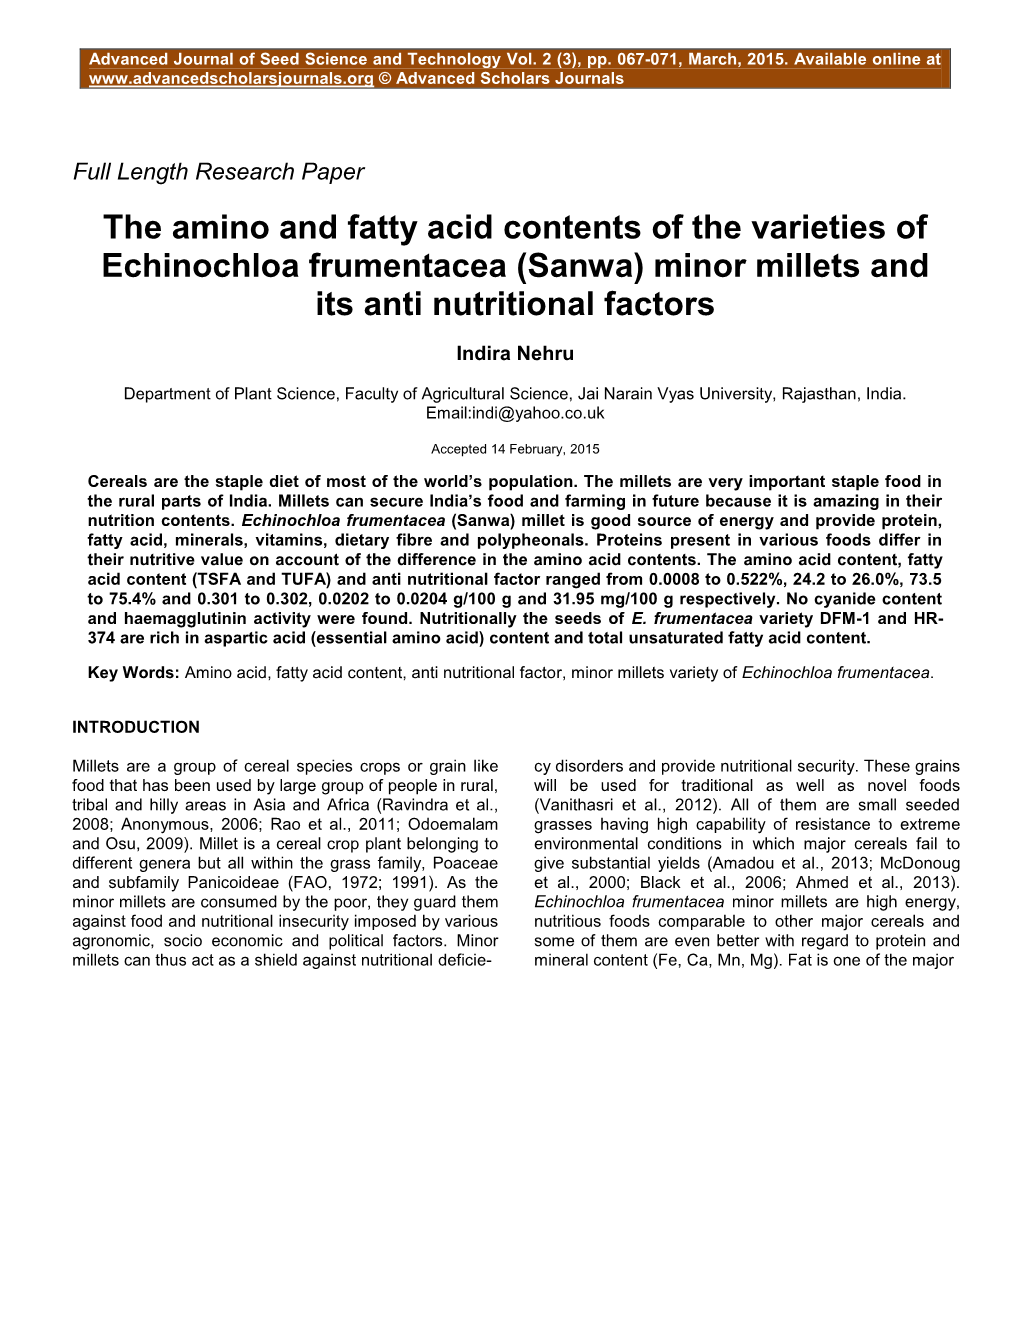 The Amino and Fatty Acid Contents of the Varieties of Echinochloa Frumentacea (Sanwa) Minor Millets and Its Anti Nutritional Factors